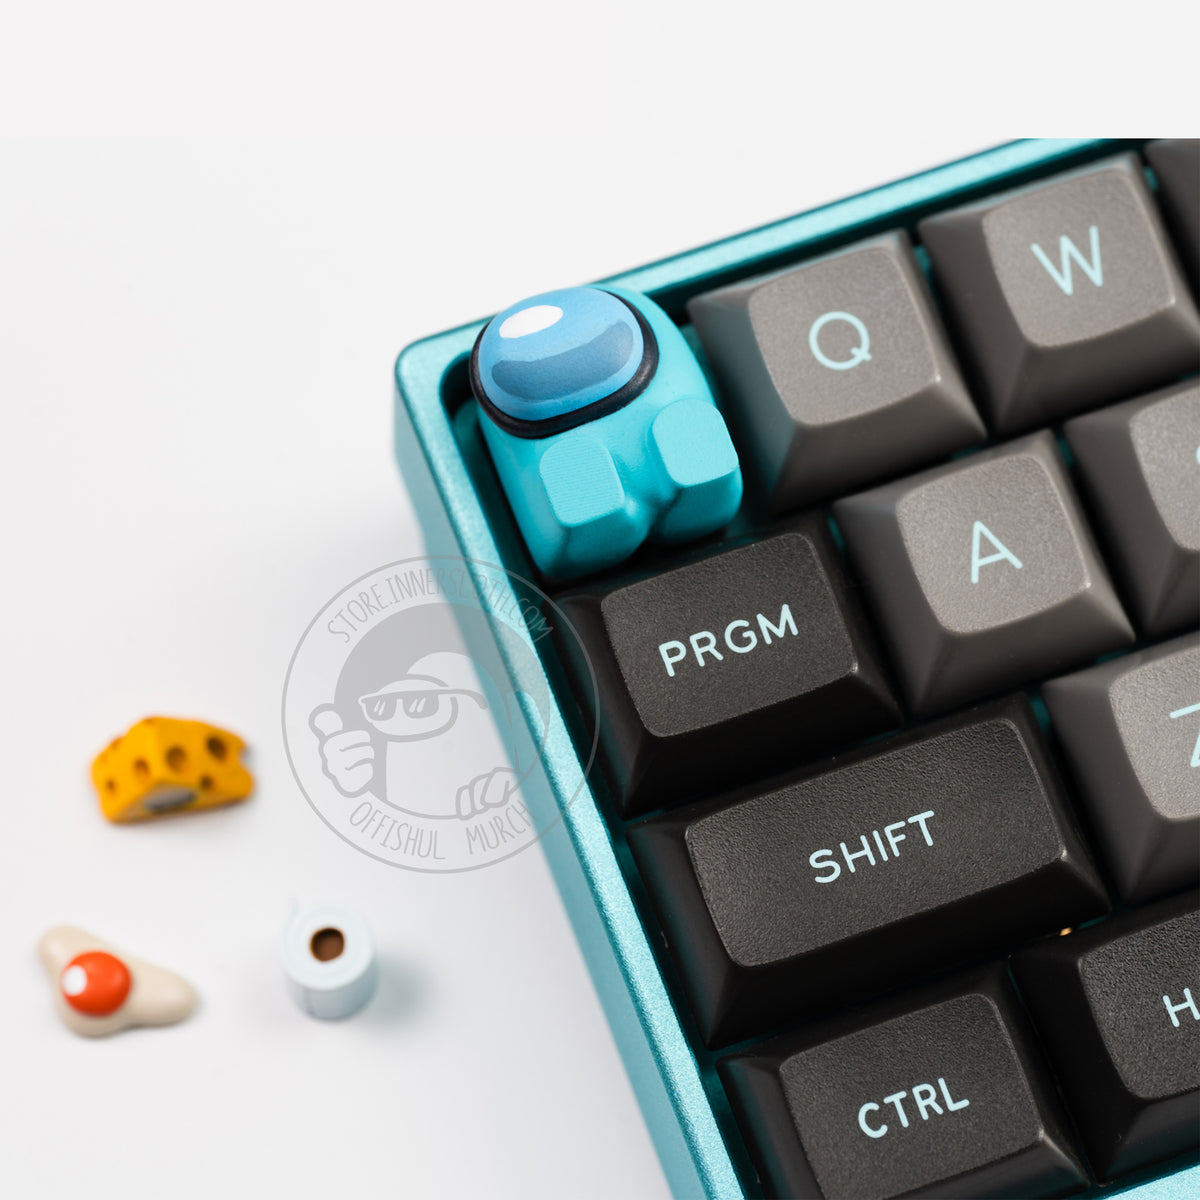 A product photo of the cyan keycap taking the place of the escape key on a cyan keyboard with grey and black keys. The three accessories (fried egg, cheese, and toilet paper) are out of focus on the white table beside the keyboard.